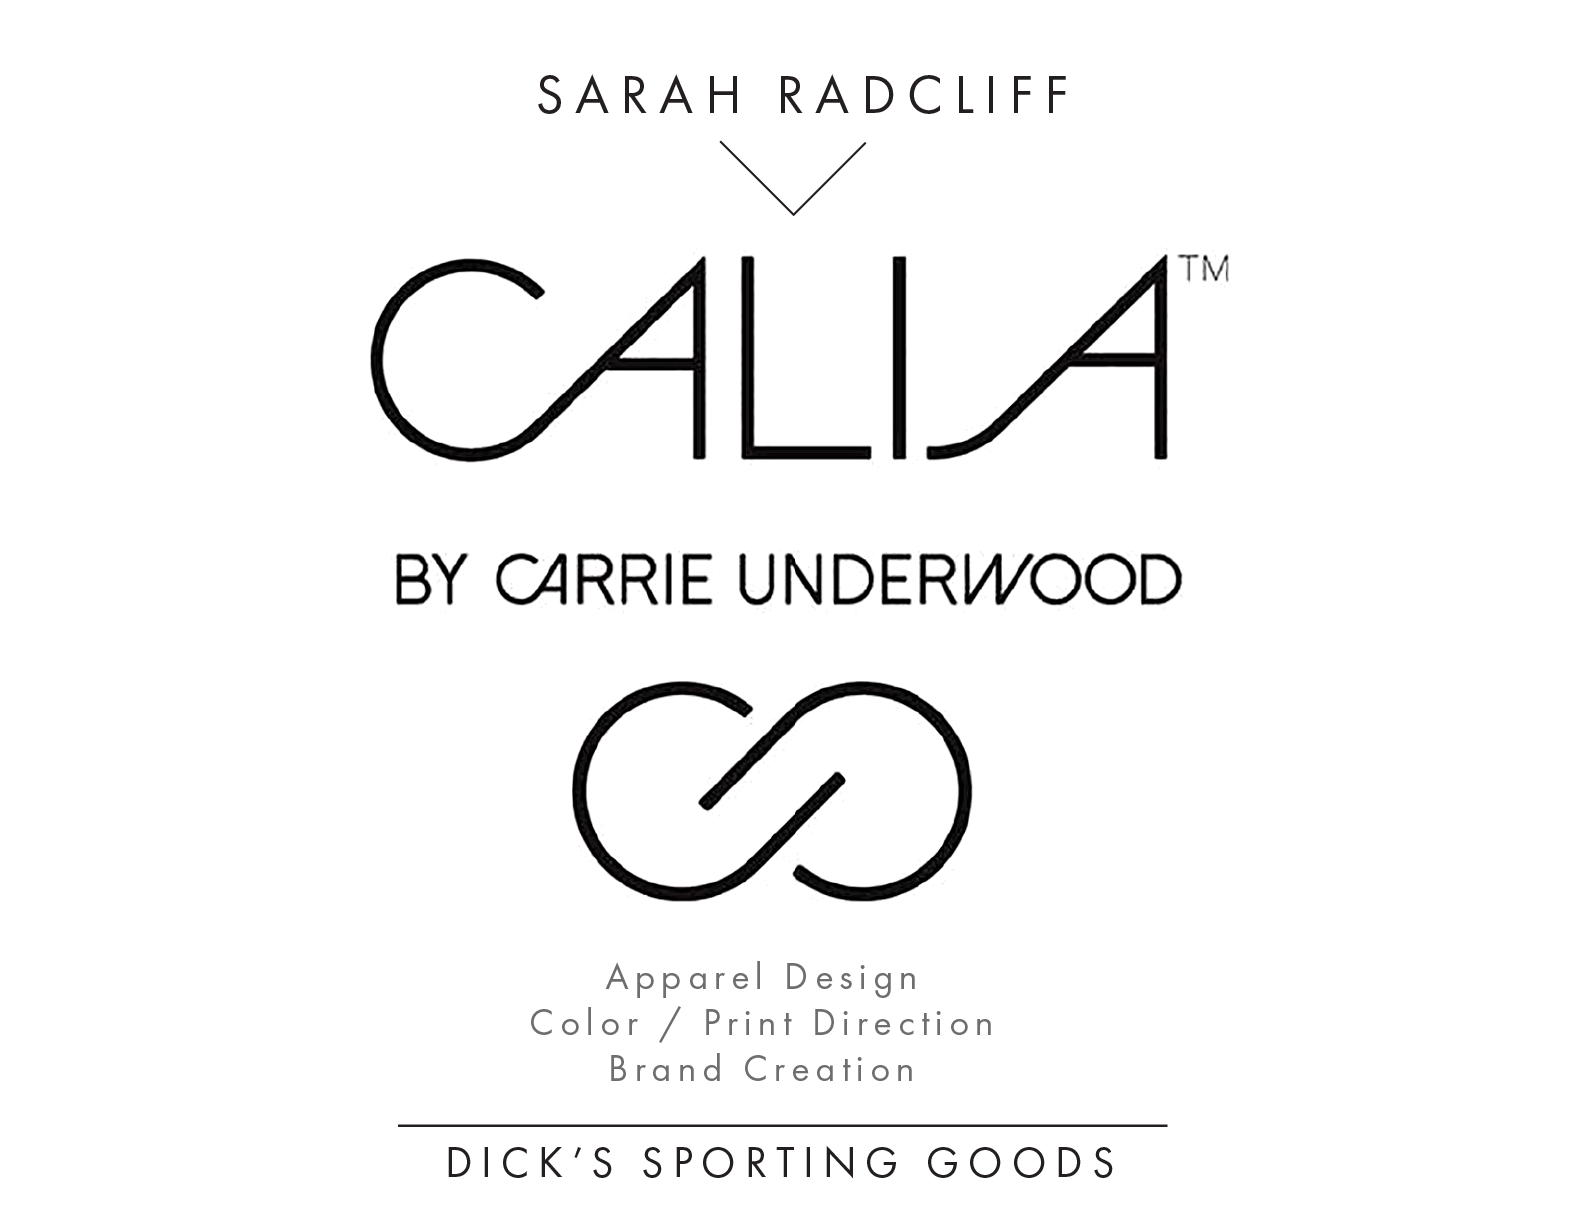 Carrie Underwood And Dick's Sporting Goods Unveil CALIA By Carrie Underwood  - Carrie Underwood